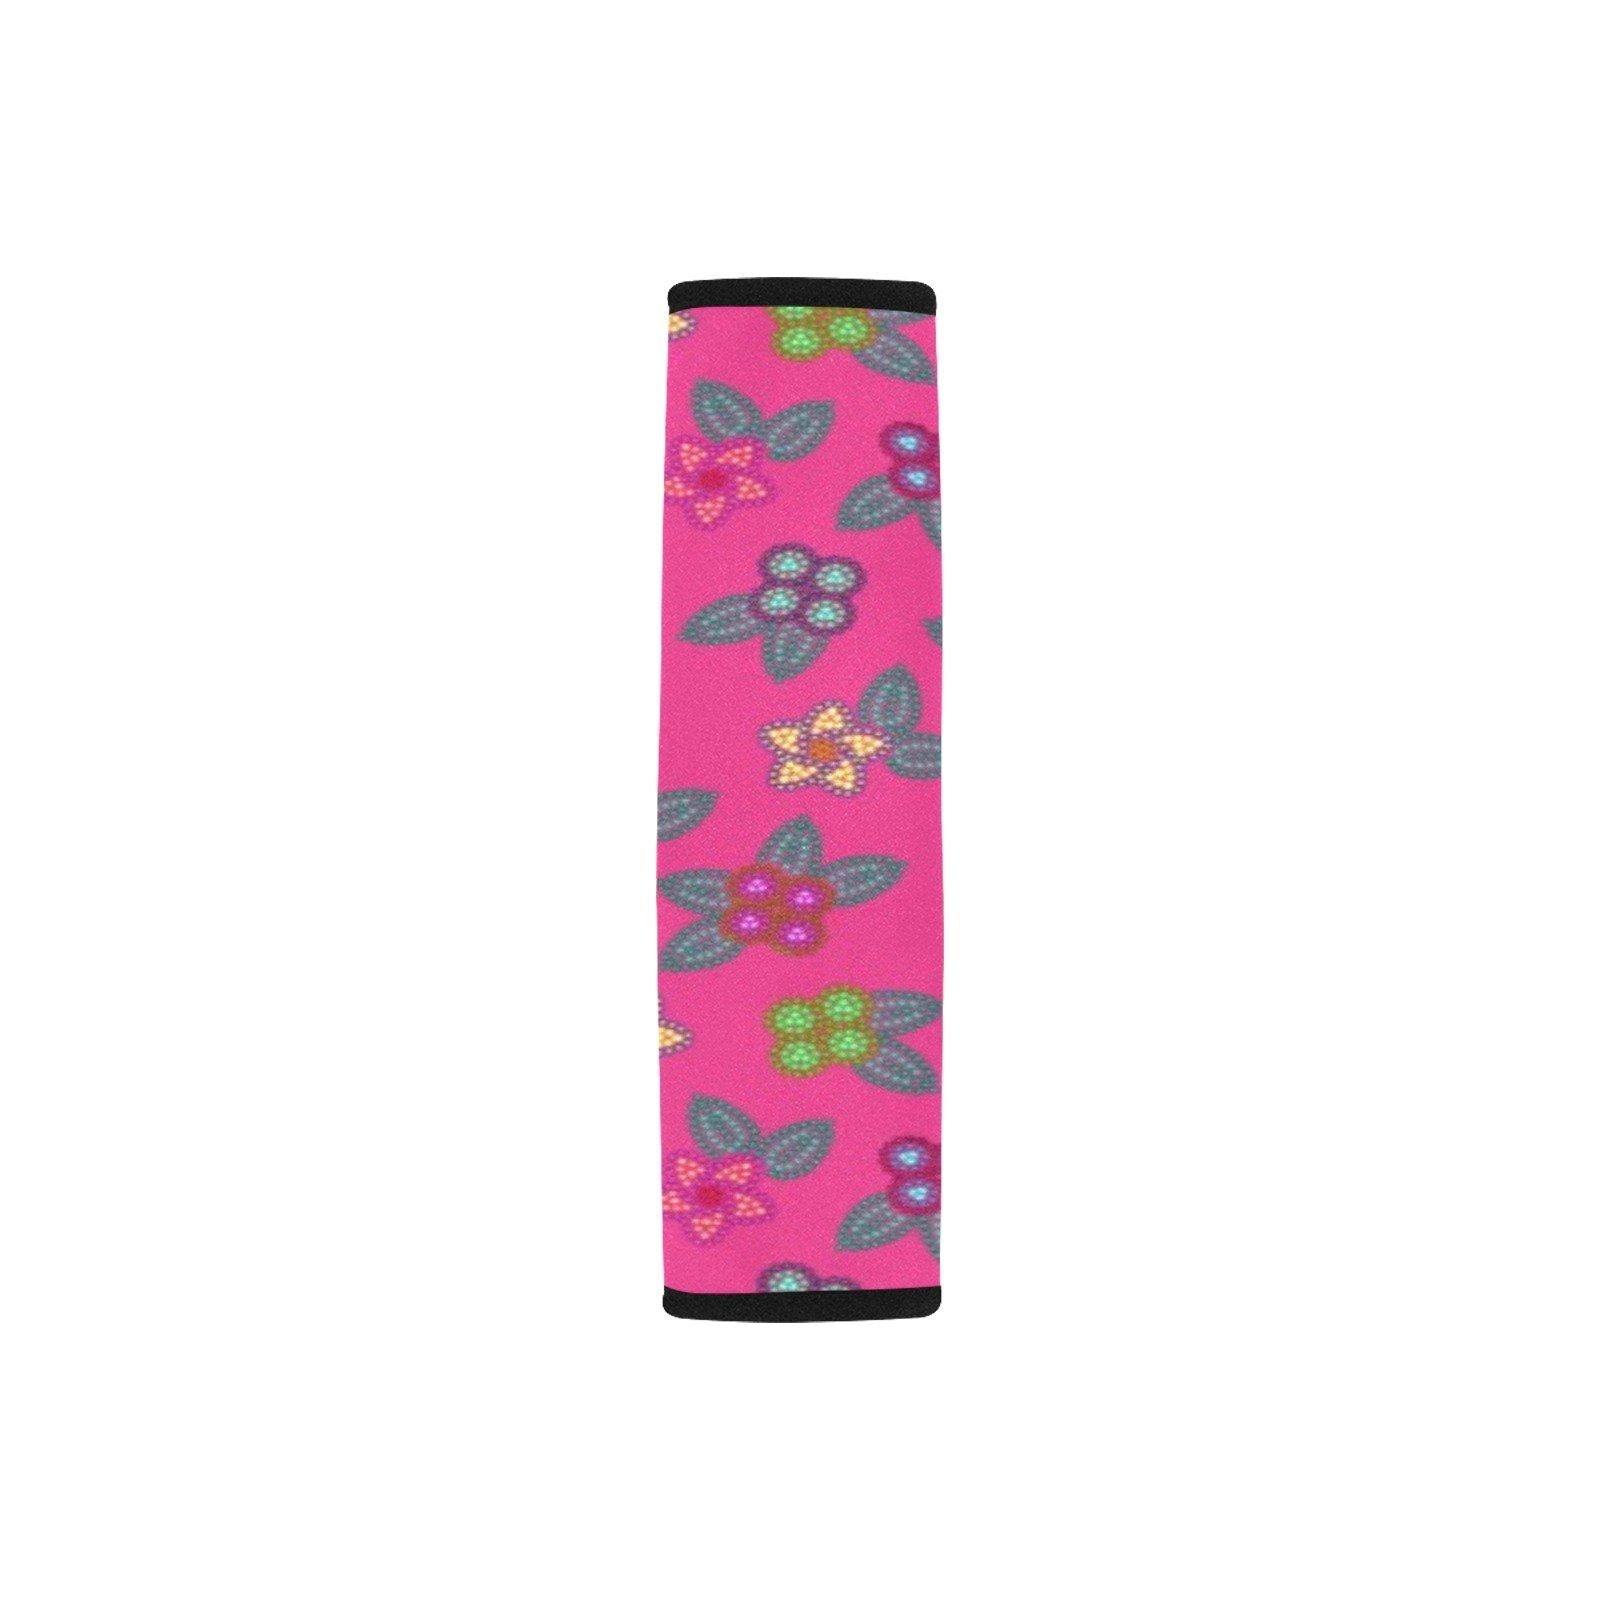 Berry Flowers Car Seat Belt Cover 7''x12.6'' (Pack of 2) Car Seat Belt Cover 7x12.6 (Pack of 2) e-joyer 